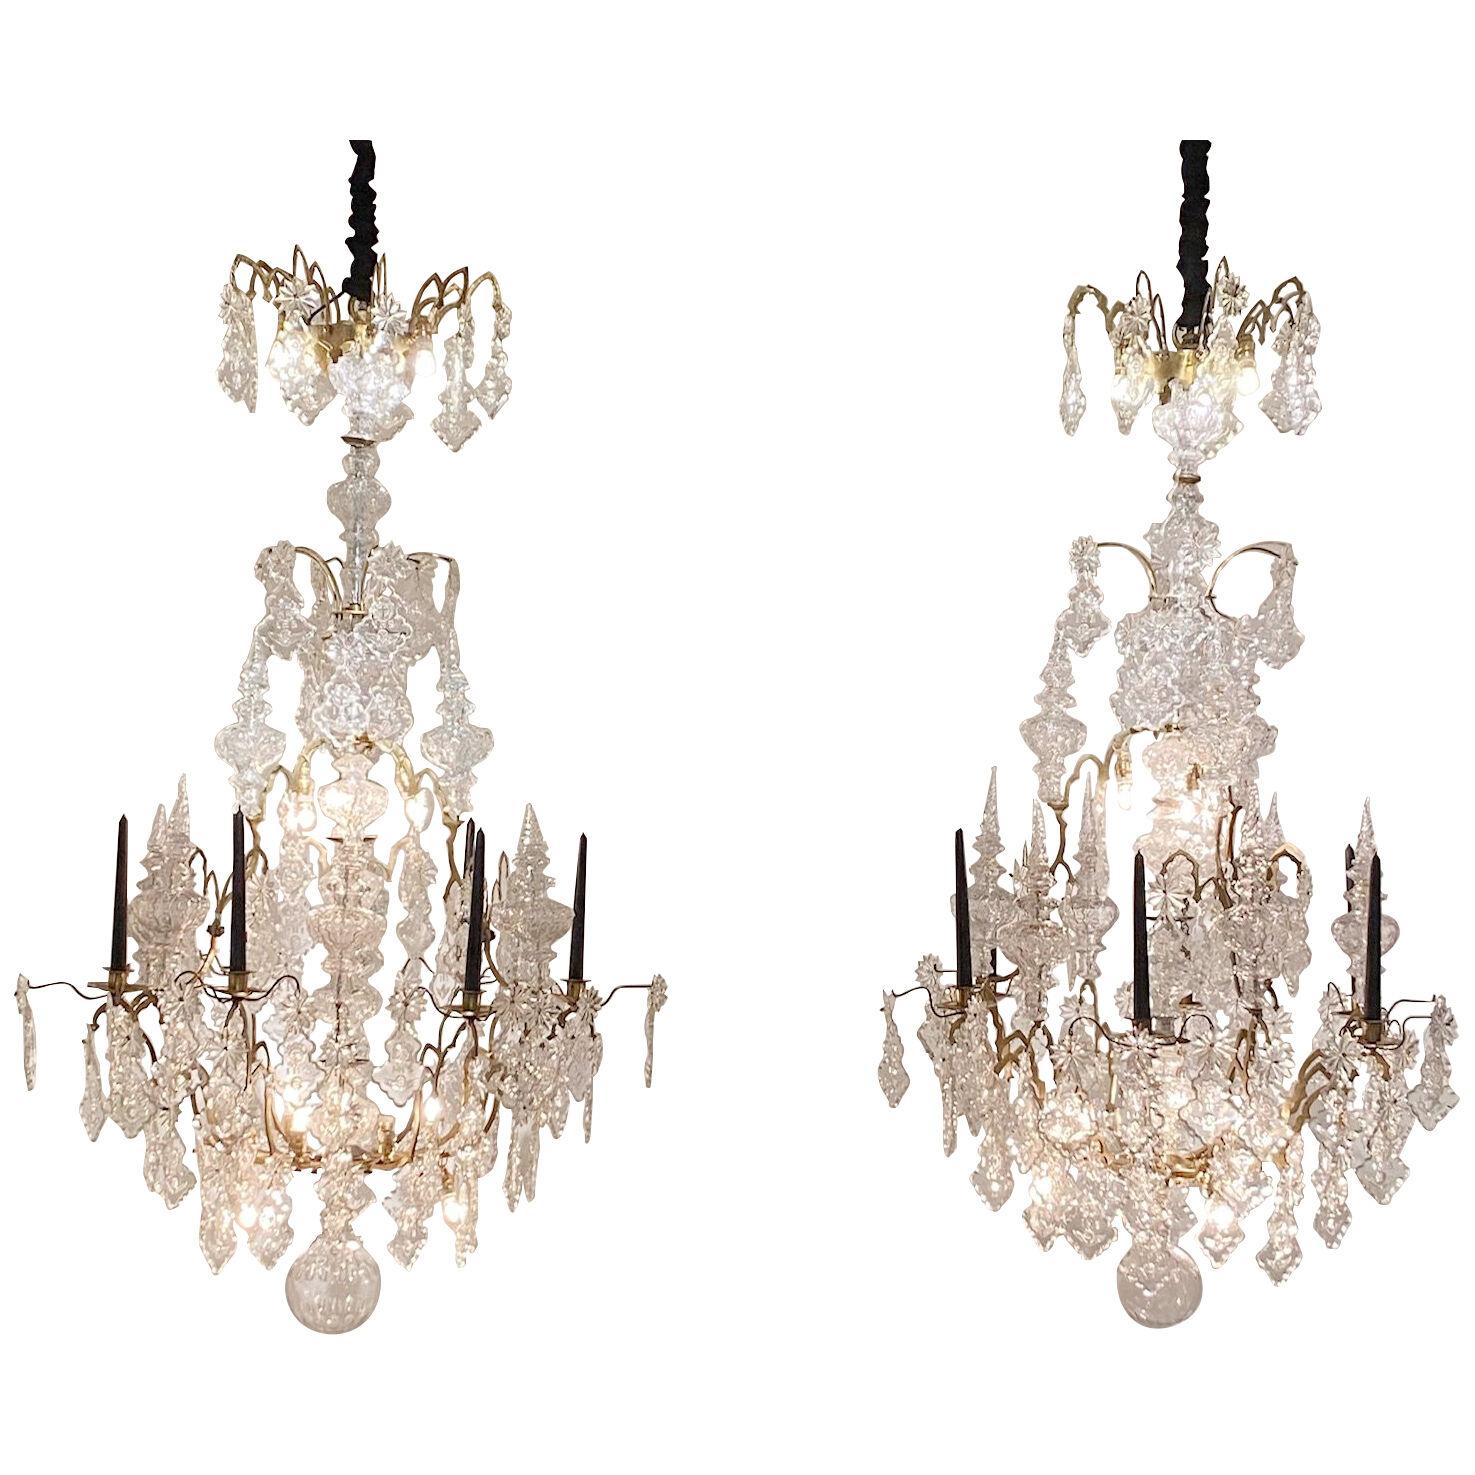 Pair of large exceptional mid 19th century chandeliers.